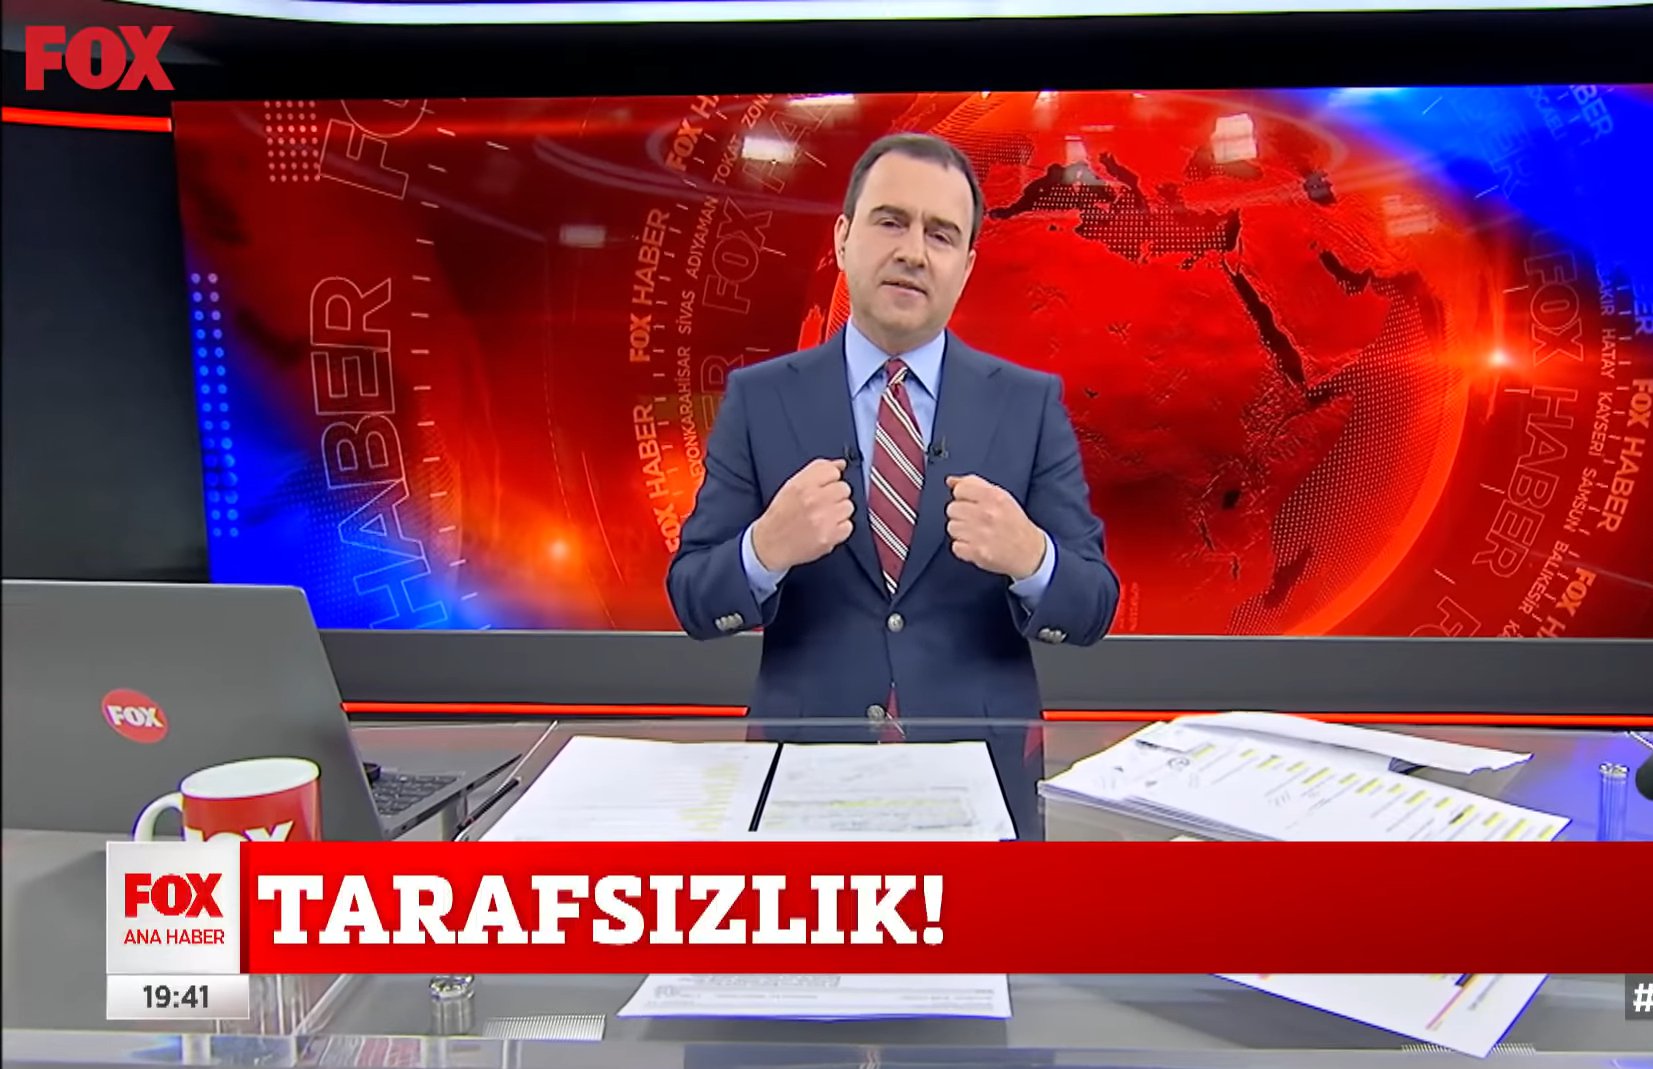 Fox TV anchor responds to RTÜK probe over 'biased' comments